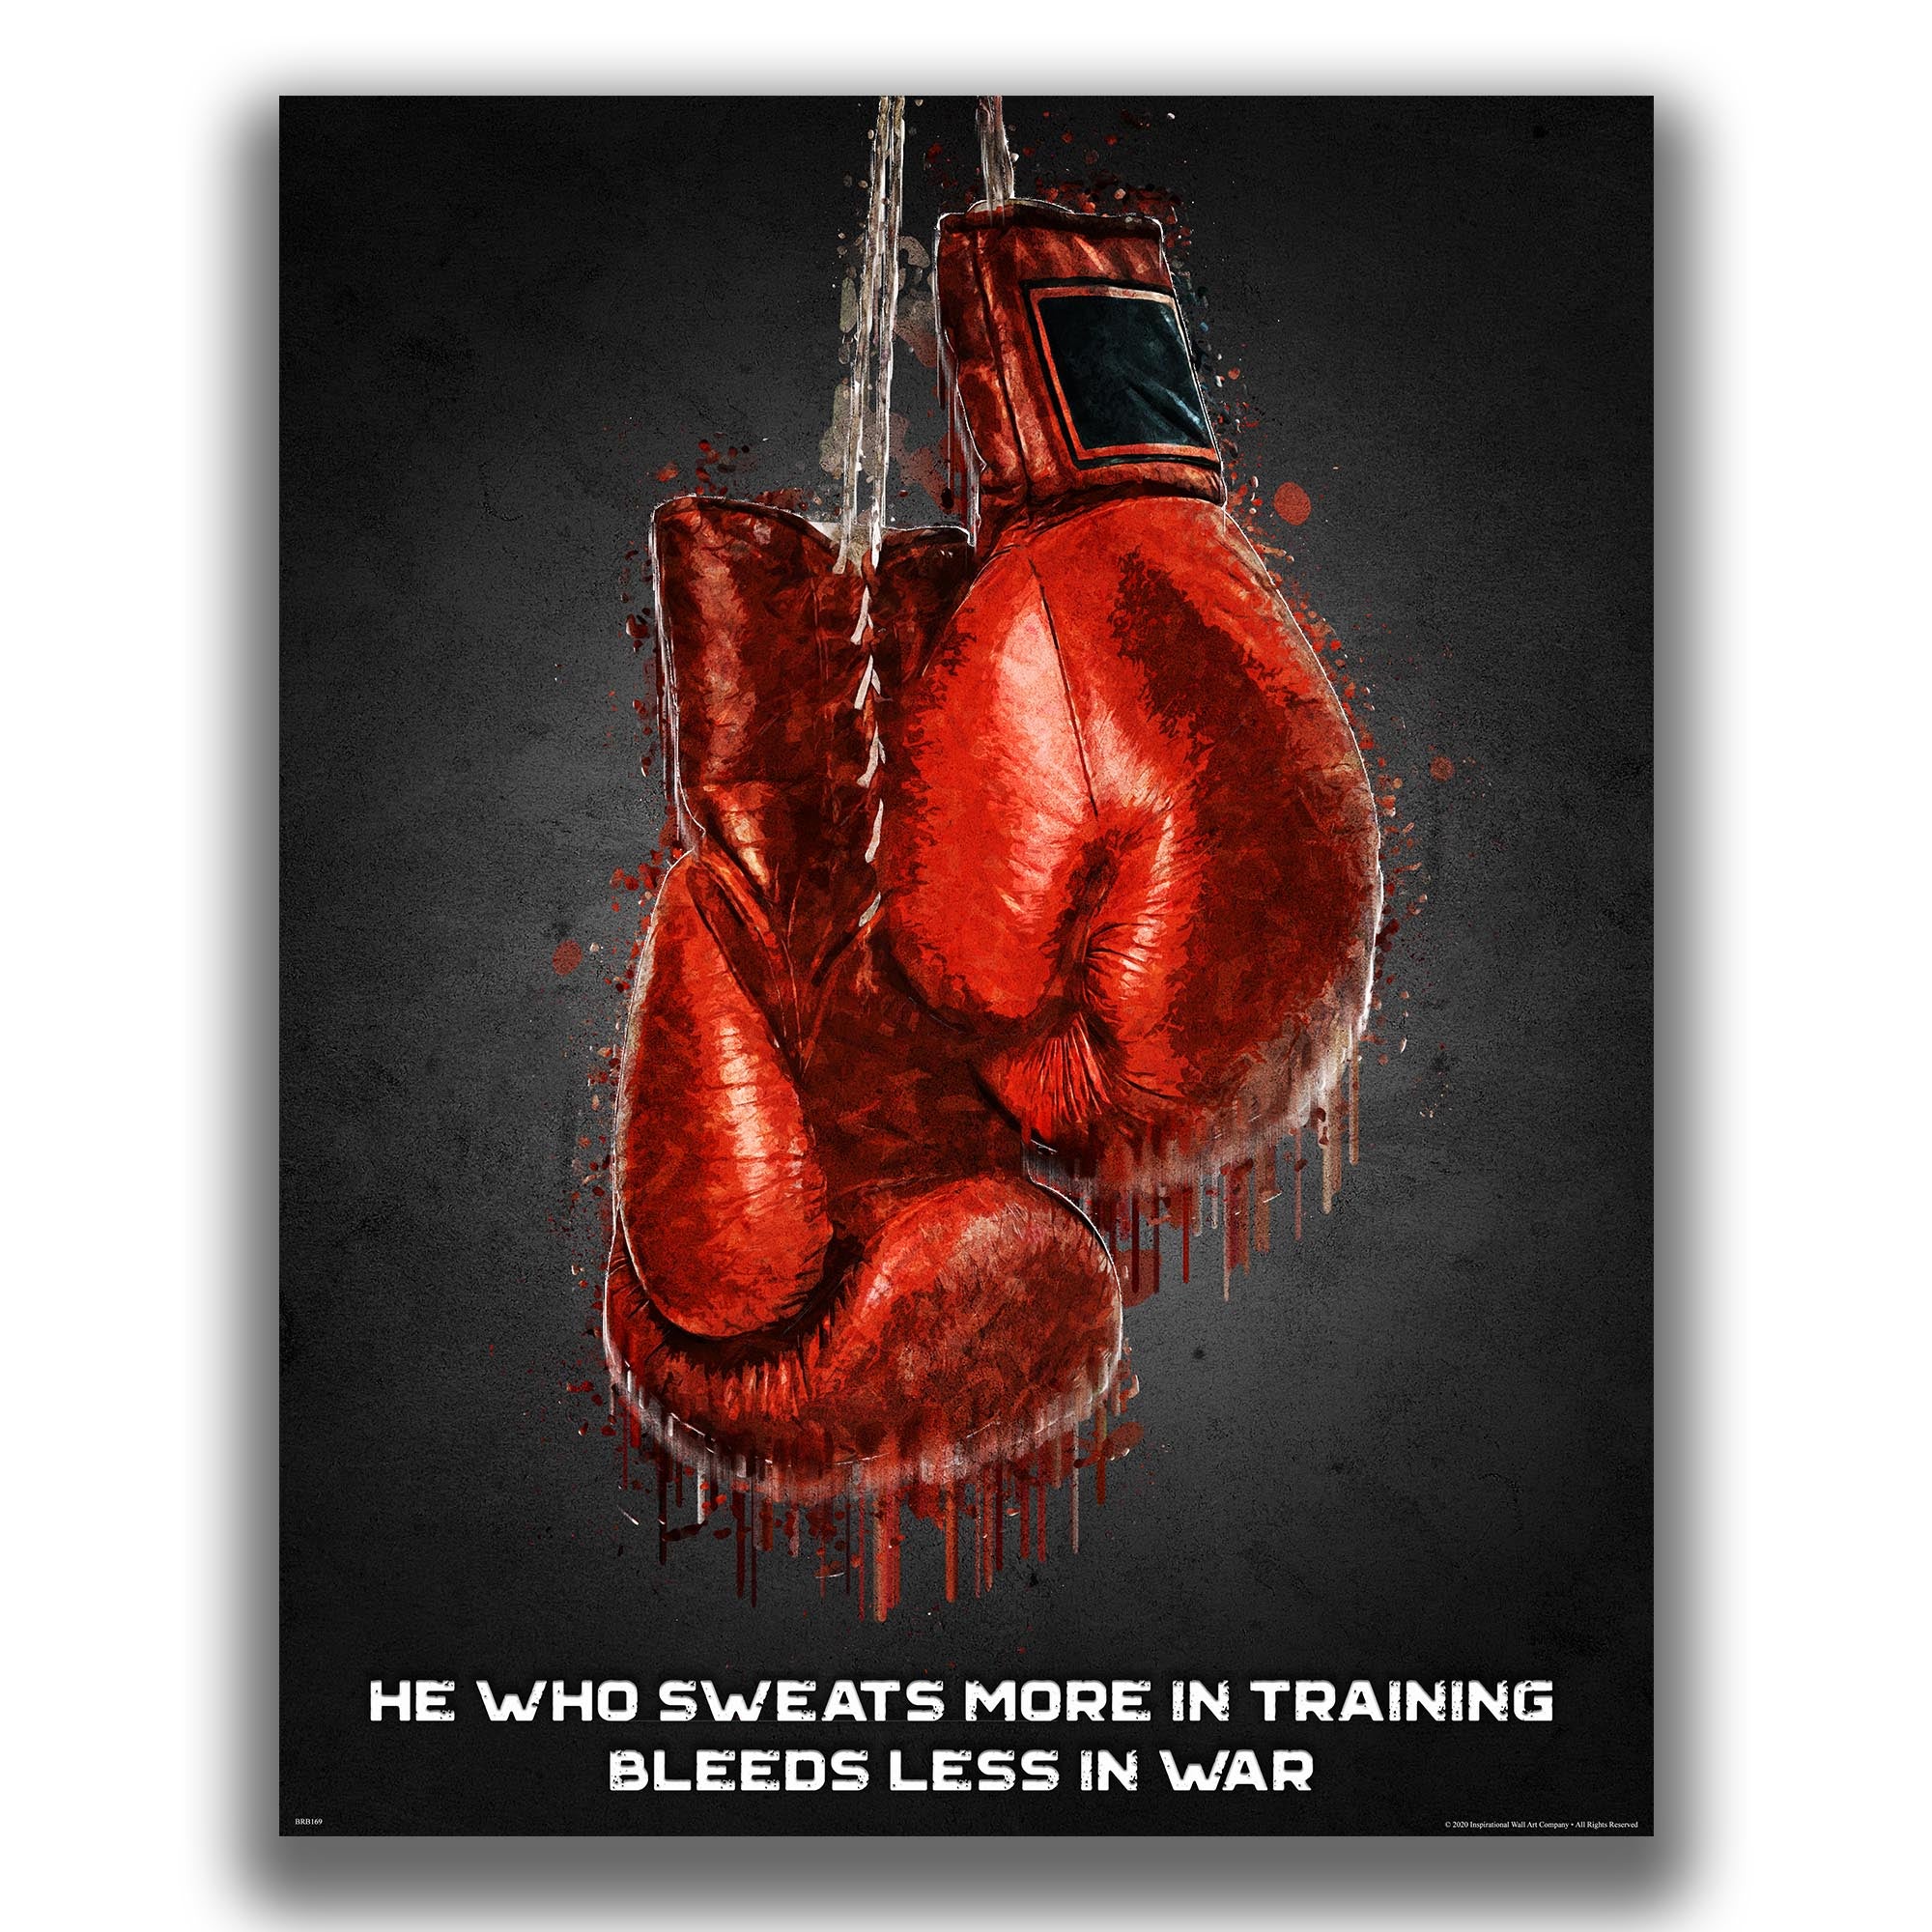 Boxing Posters